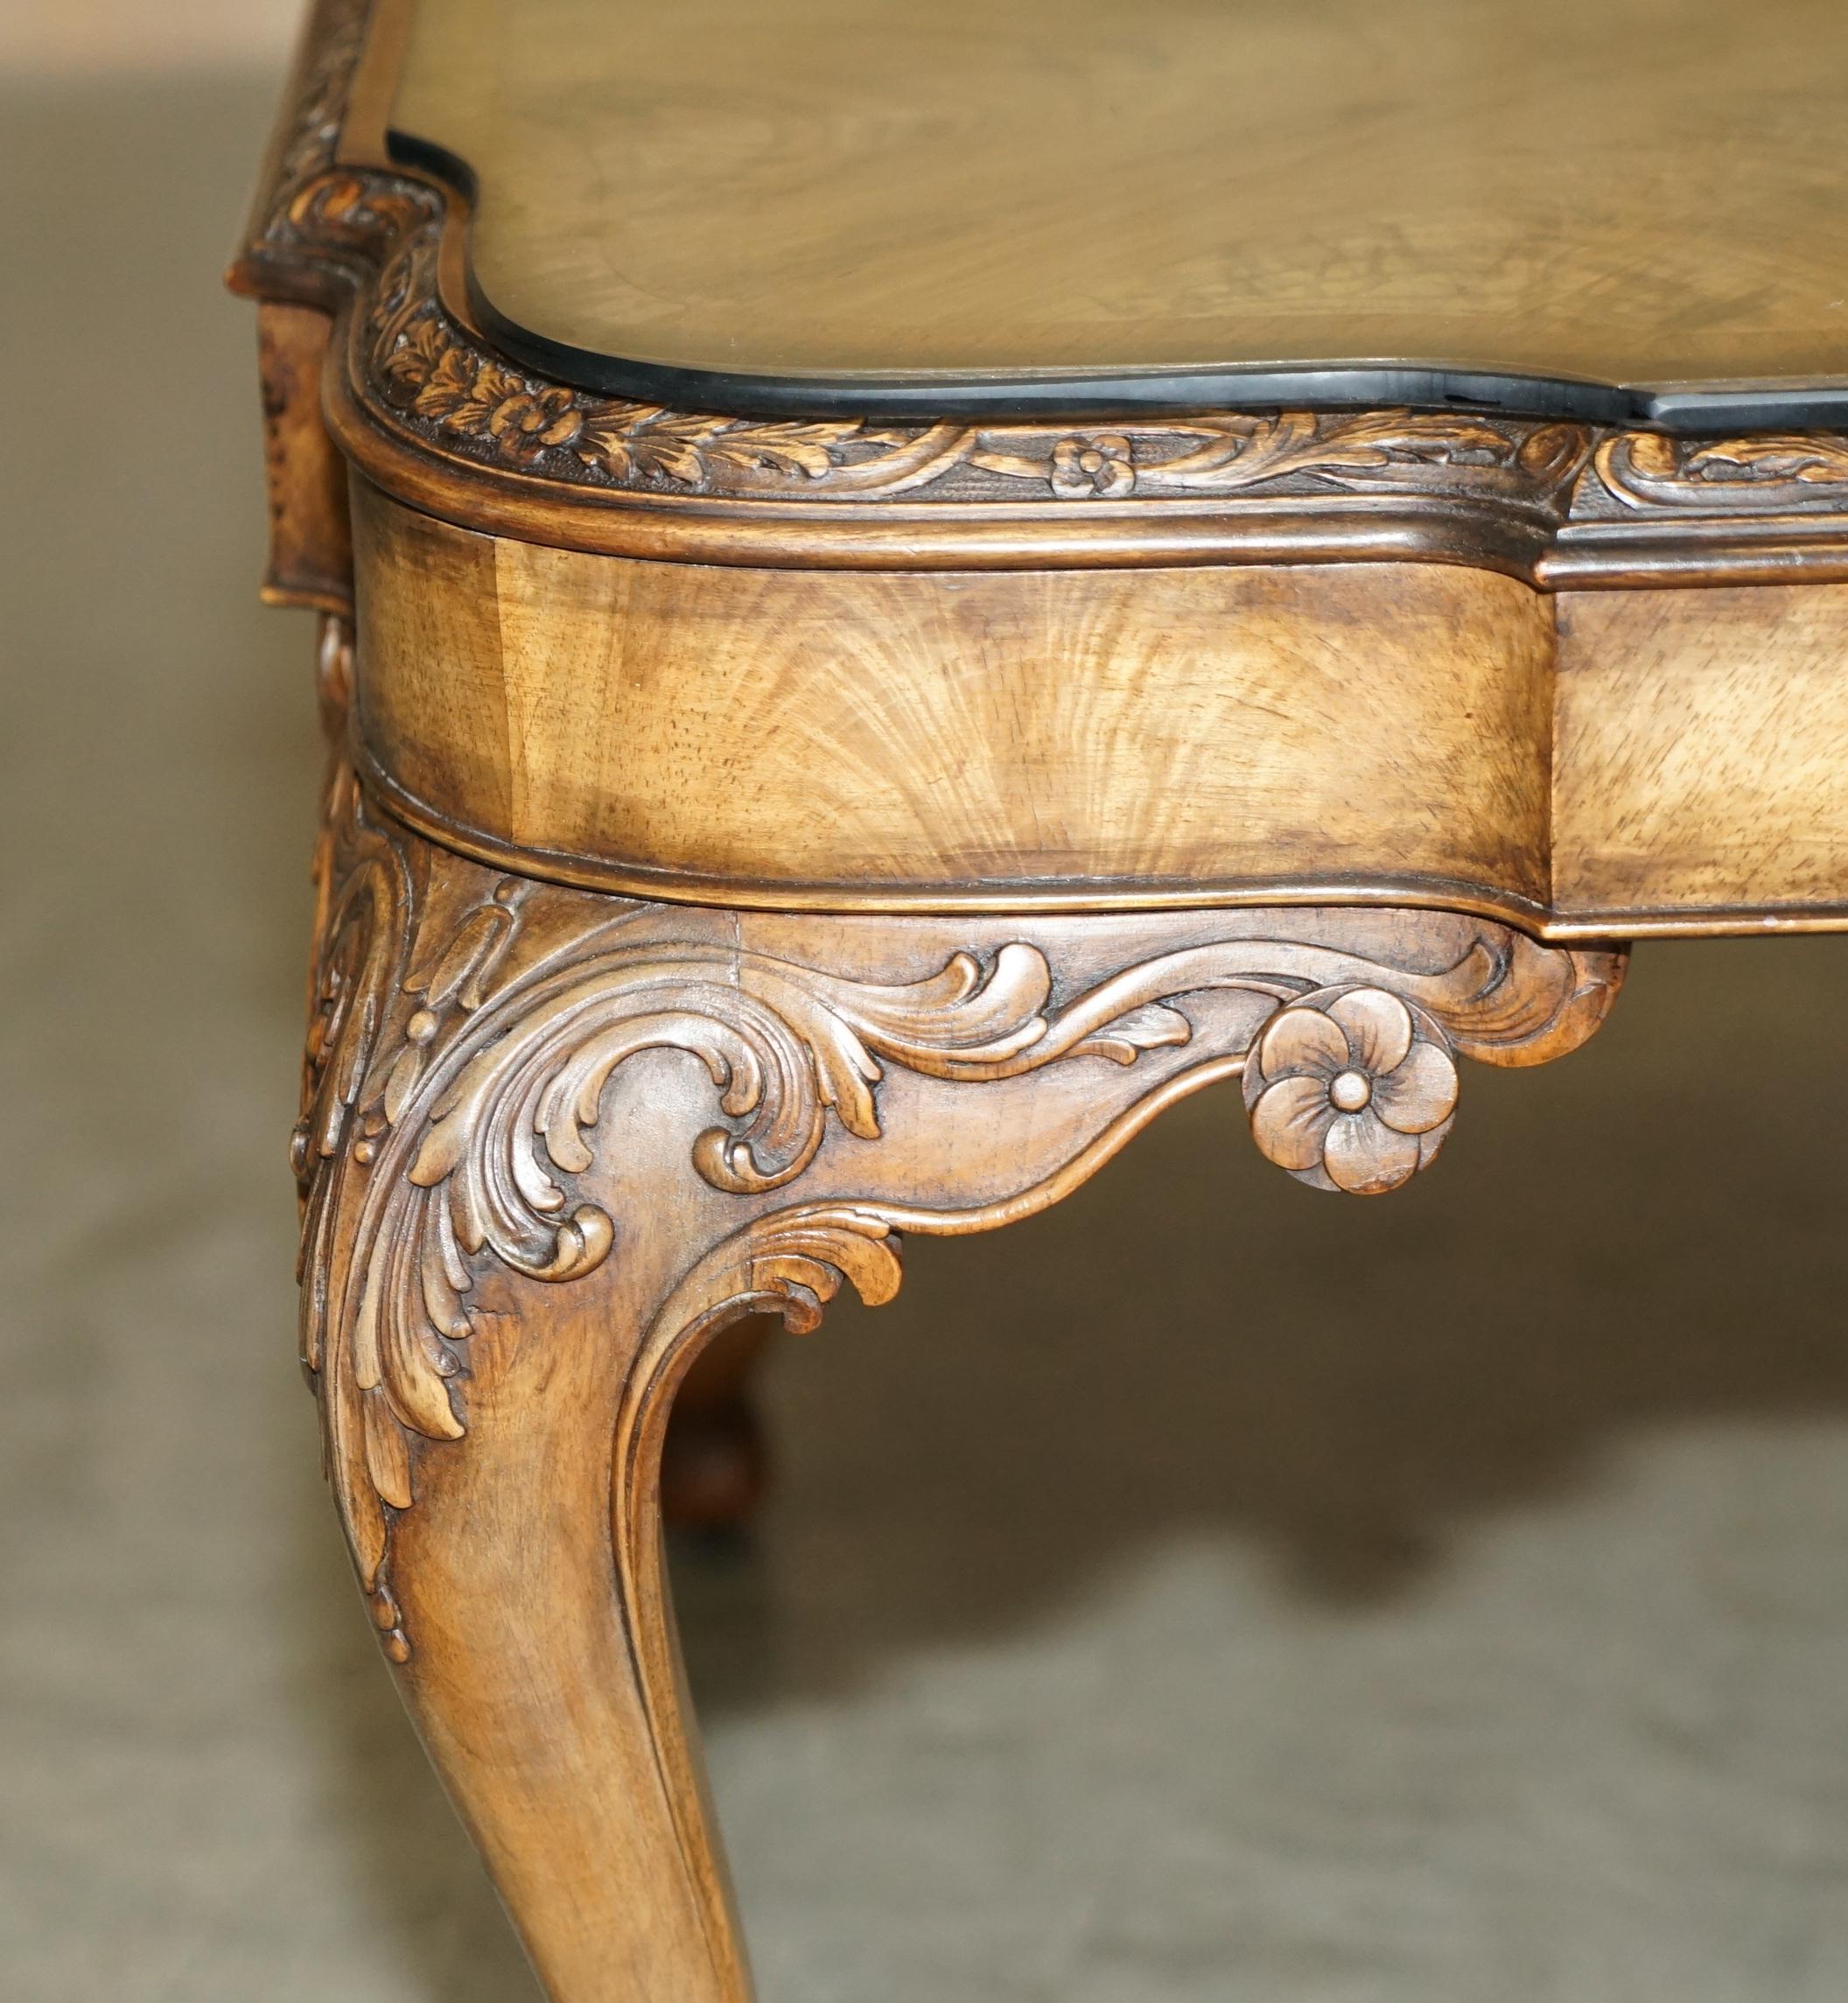 Exquisite Burr Walnut Coffee Cocktail Table with Ornately Carved Cabriole Legs For Sale 1